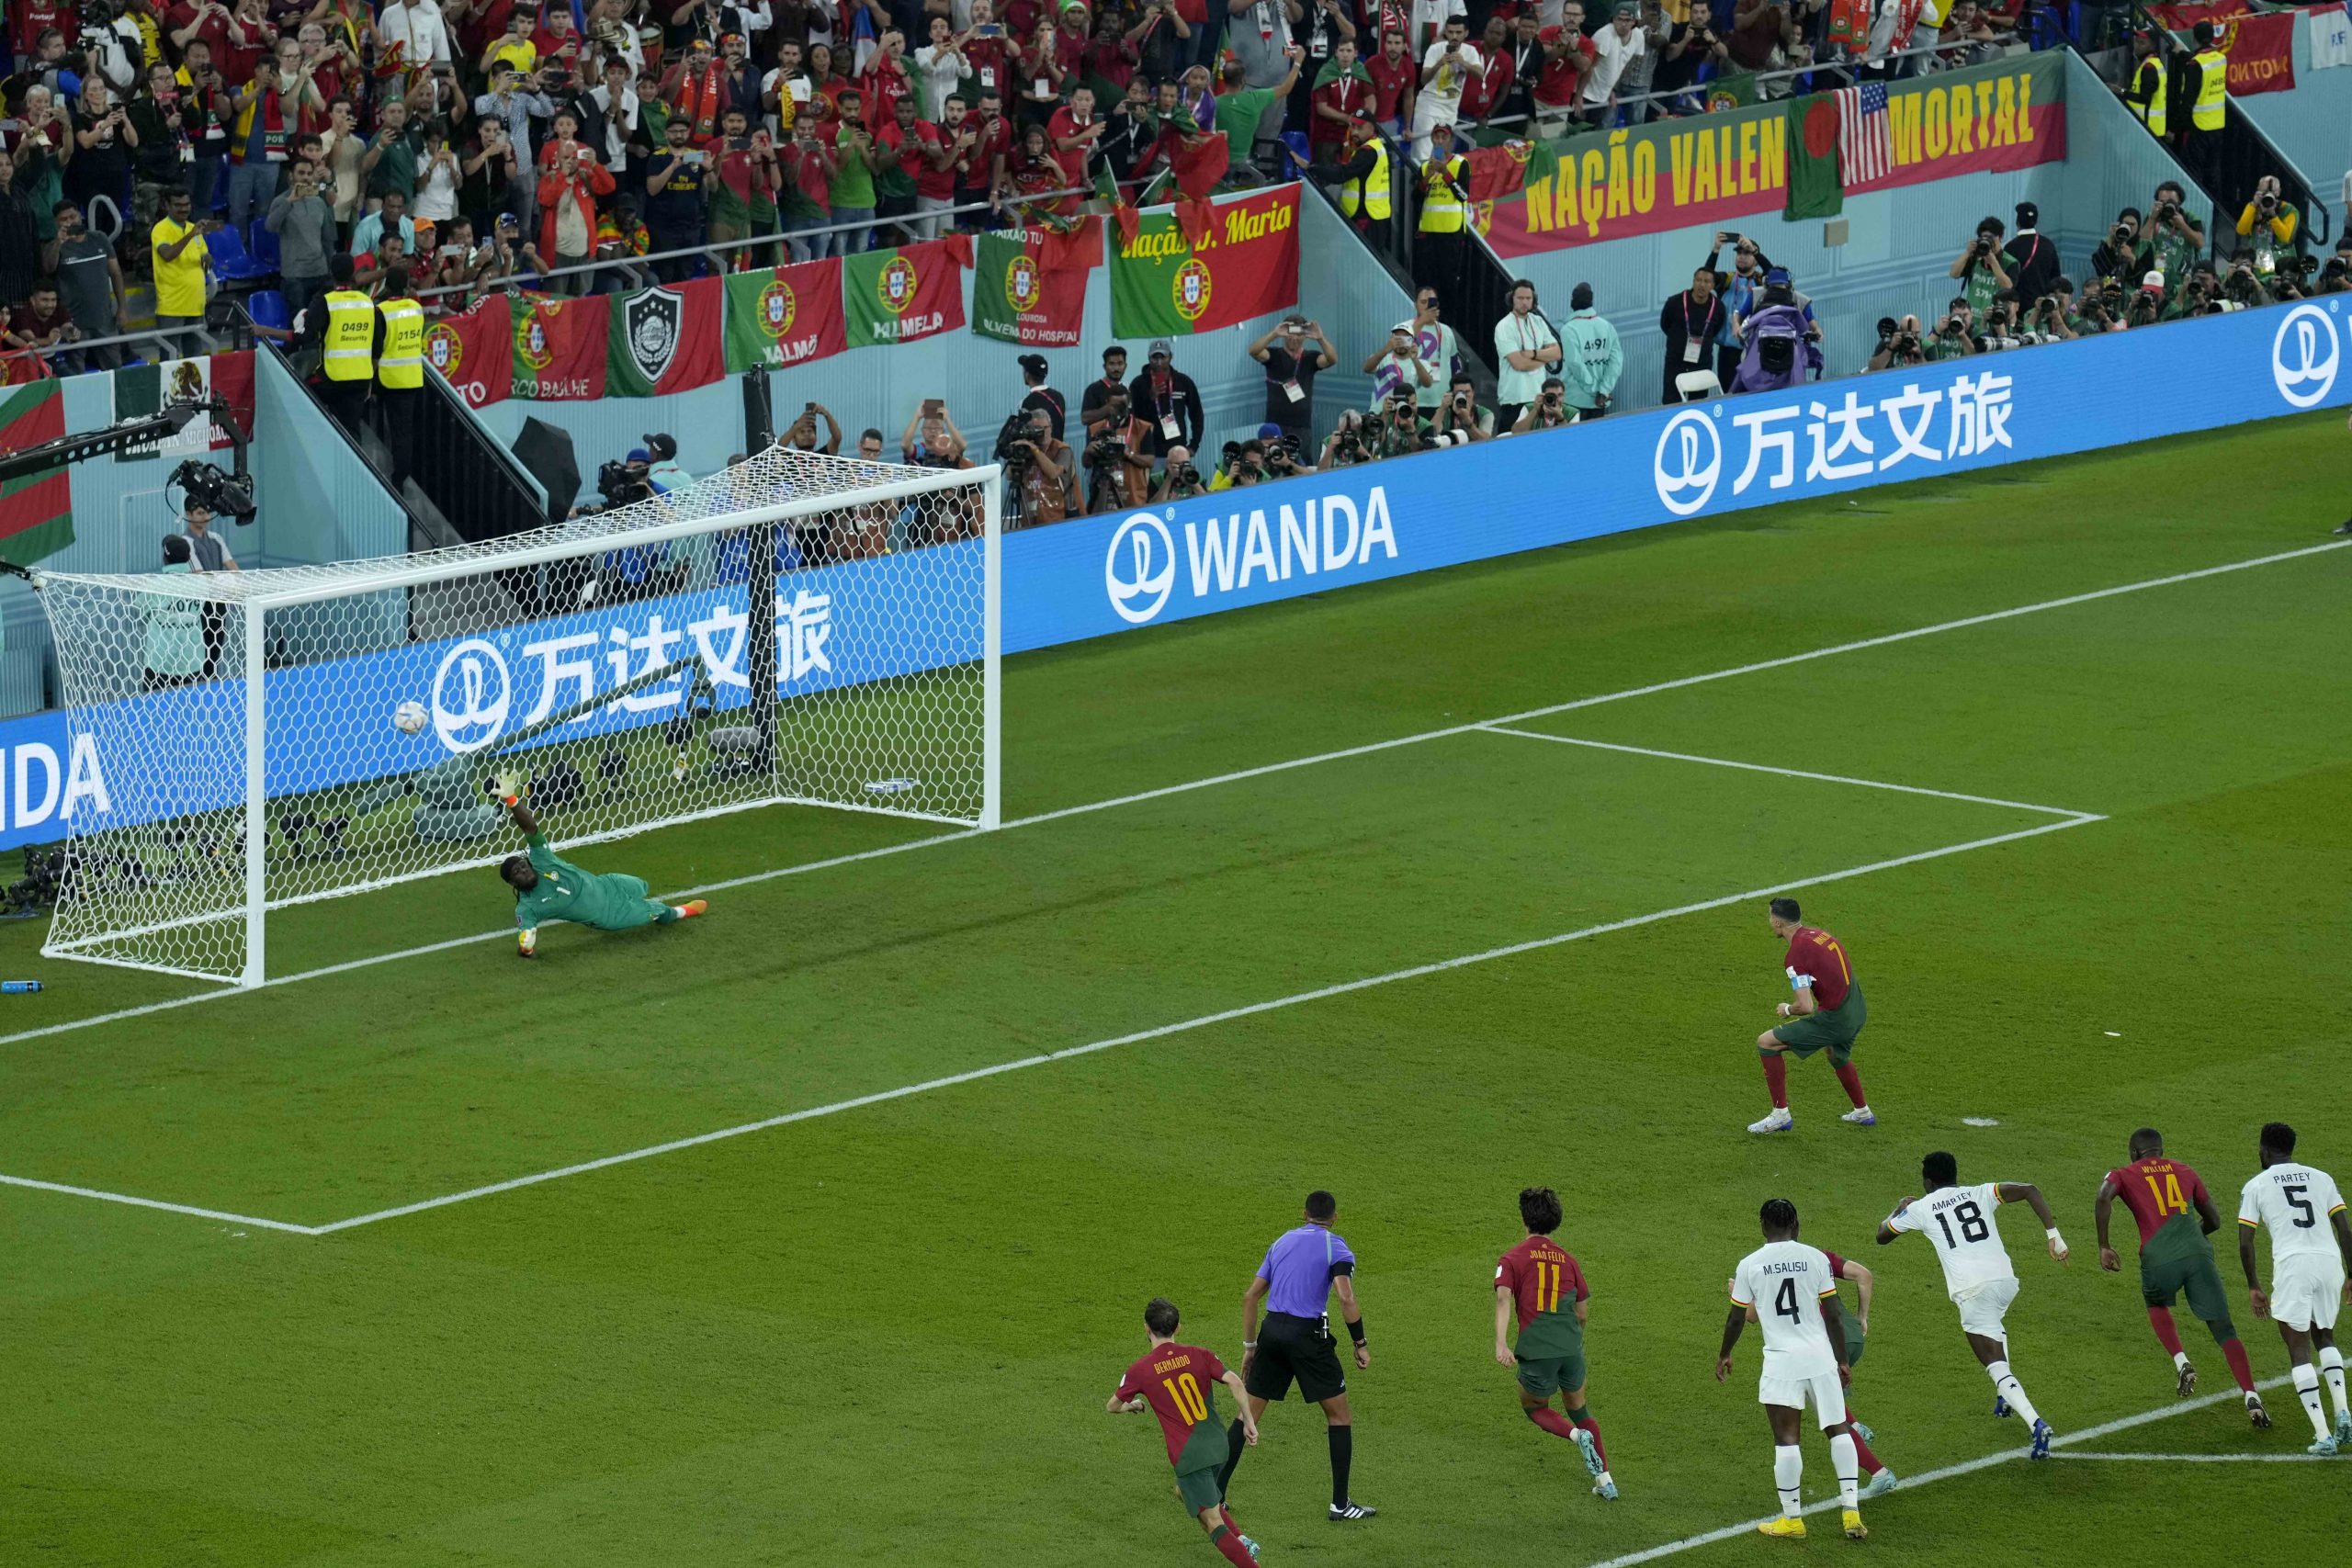 Ghana robbed vs Portugal? Fans ask for VAR call, object Cristiano Ronaldo penalty in FIFA World Cup 2022